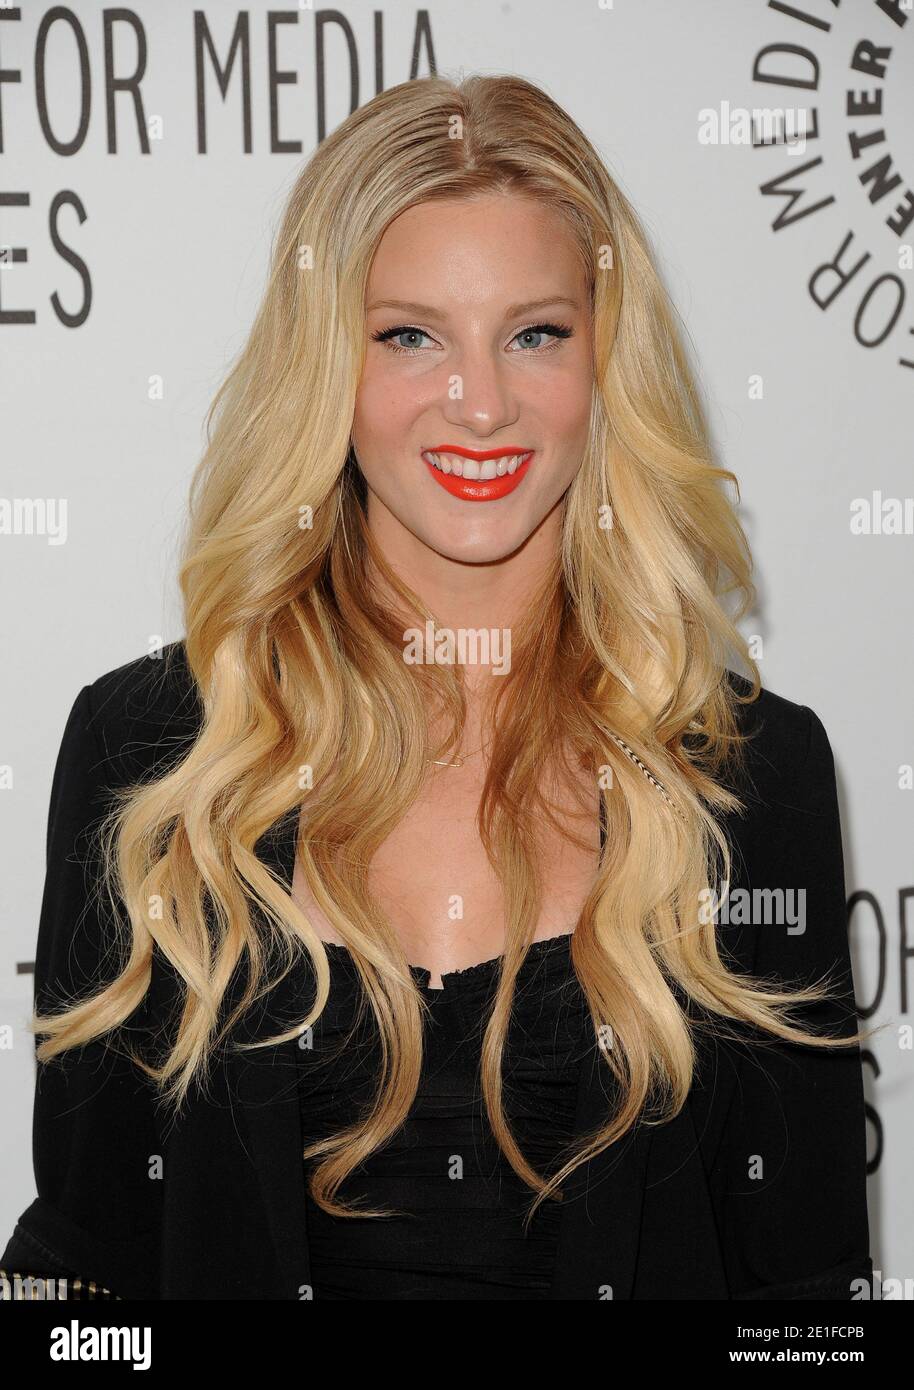 Heather Morris arrives at Paley Center for Media's Paleyfest 2011 event  honoring 'Glee' held at Saban Theater on March 16, 2011 in Beverly Hills,  California. Photo by Lionel Hahn/ABACAPRESS.COM Stock Photo - Alamy